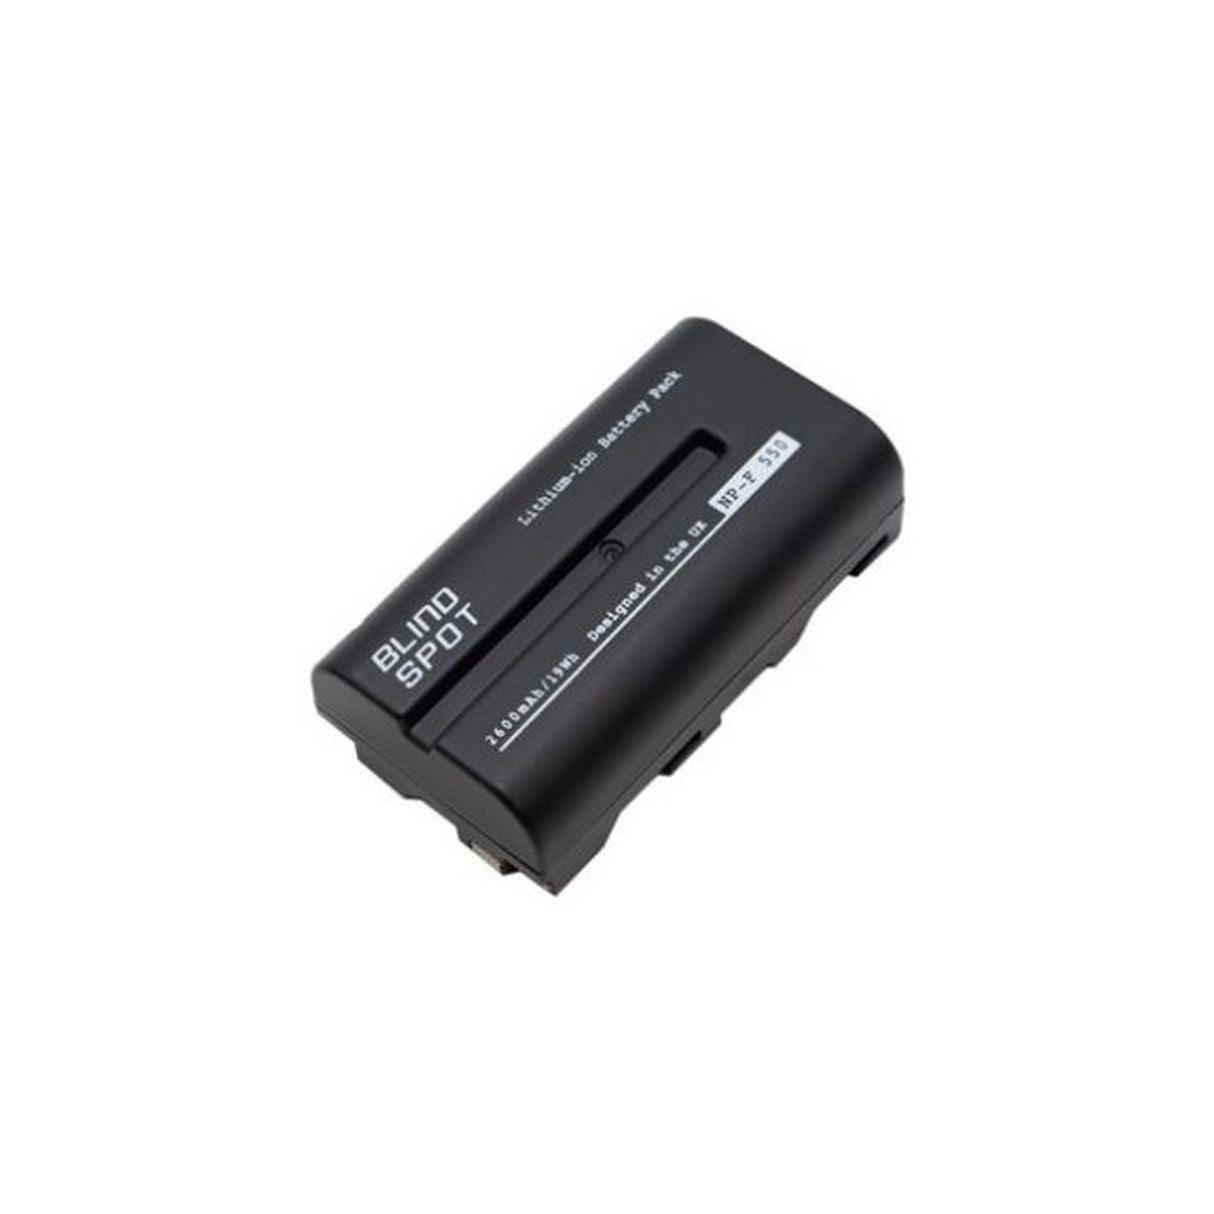 Blind Spot Gear Lithium-Ion Battery for Sony NP-F550, 1302-017-01